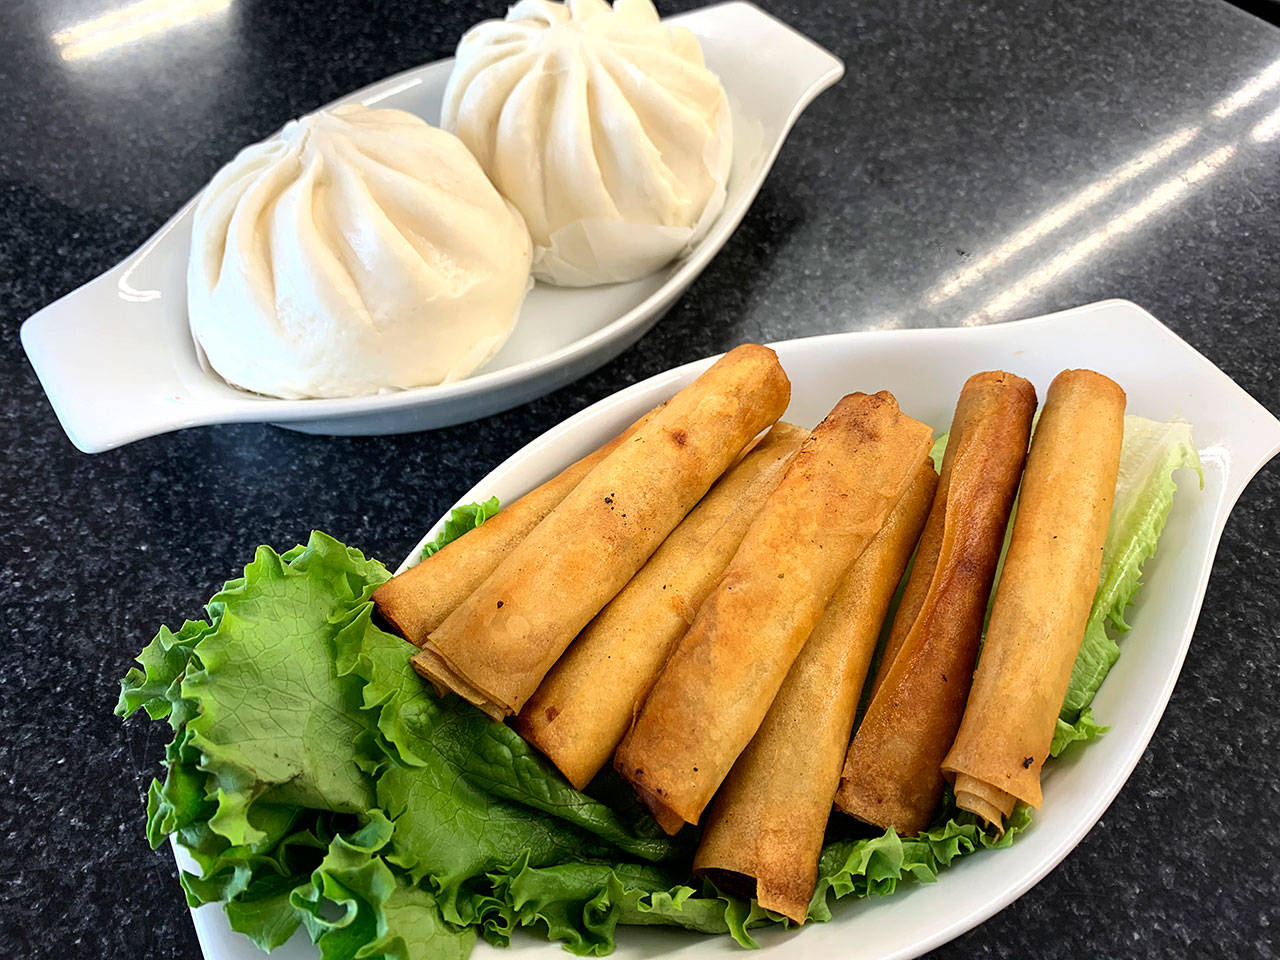 Siopao and lumpias are two Philippine staples on the menu at Gracie’s Cuisine in Everett. (Evan Thompson / The Herald)